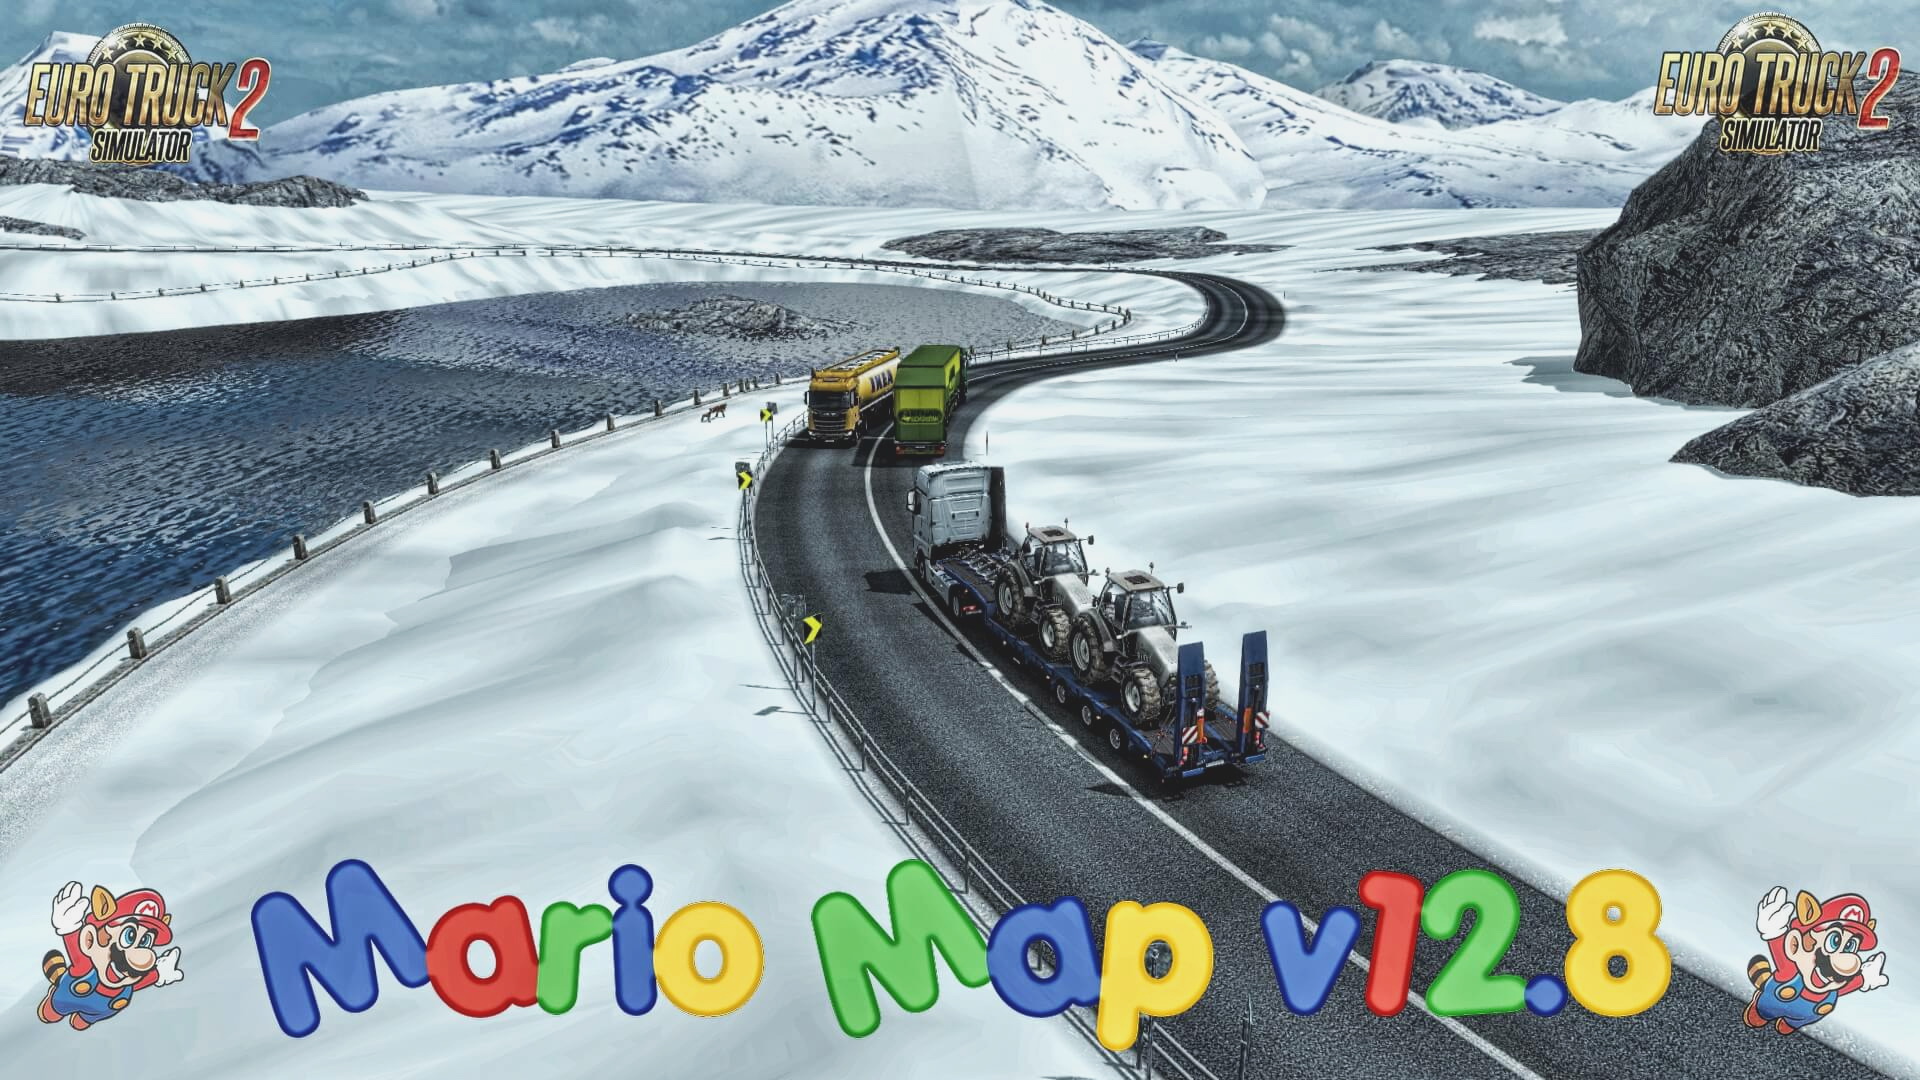 Mario Map v12.8-Update for Ets2 [1.33.x]